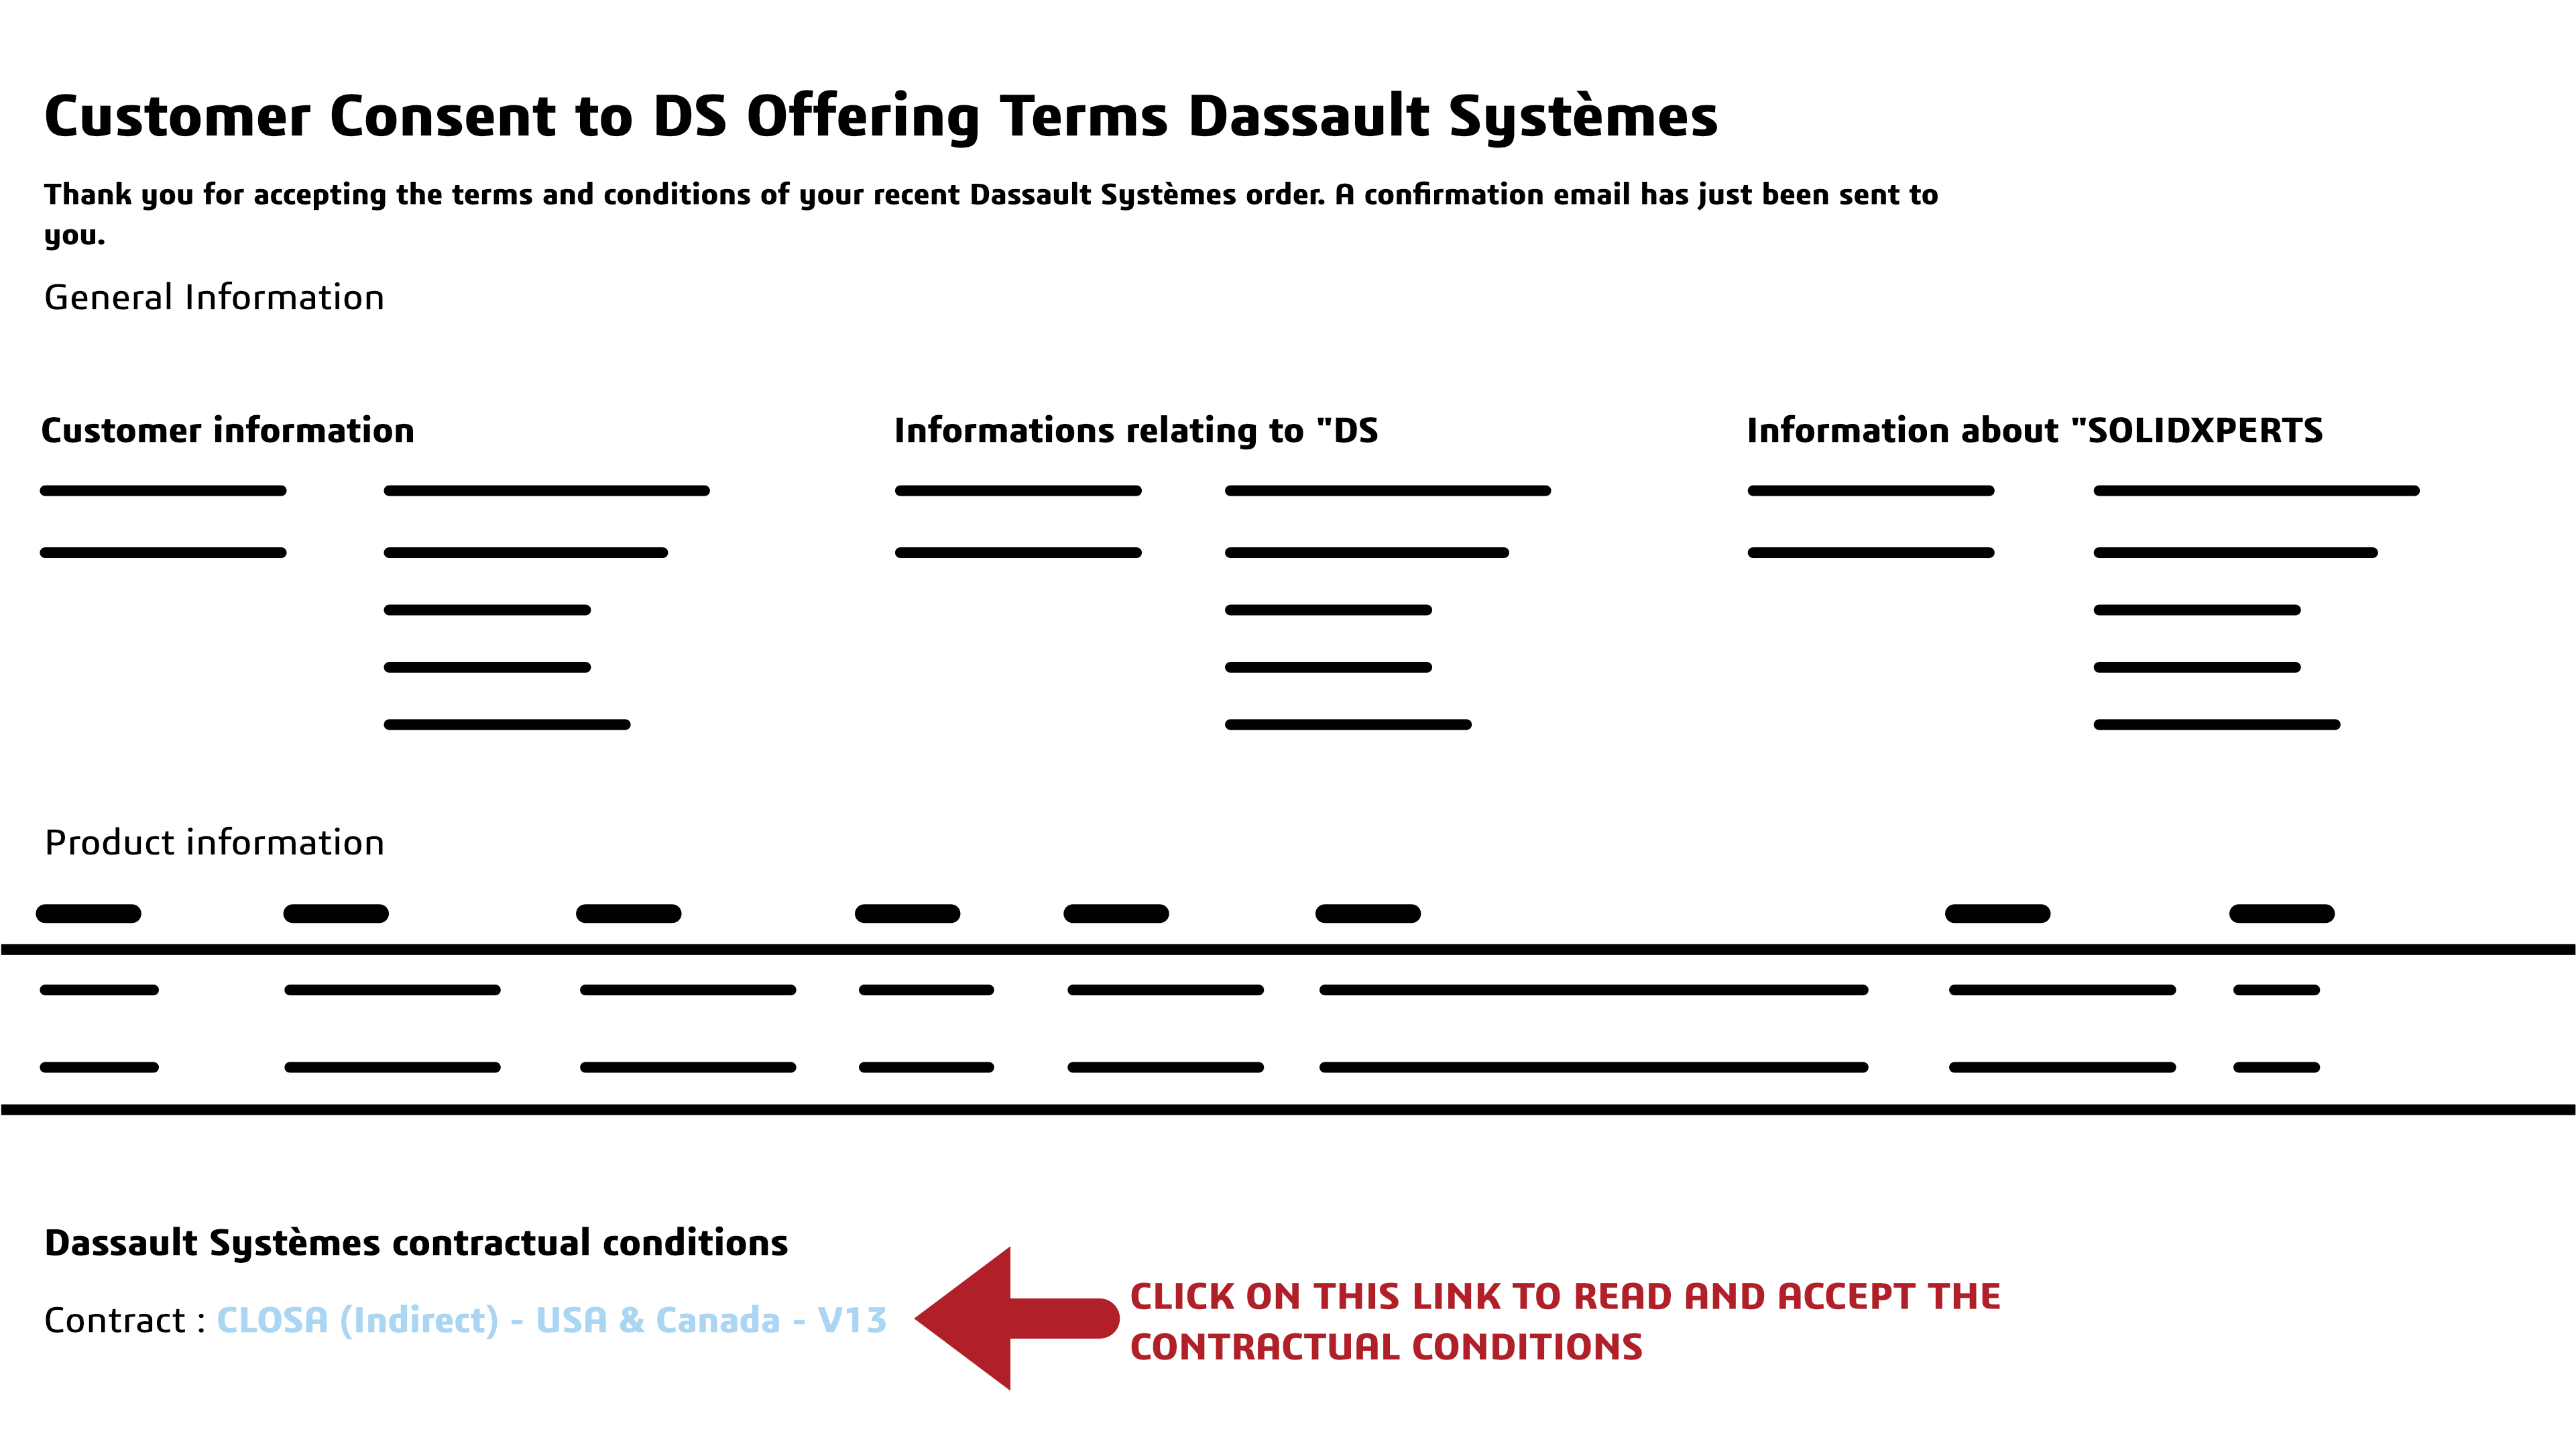 Consent to Dassault Systèmes contractual conditions@2x